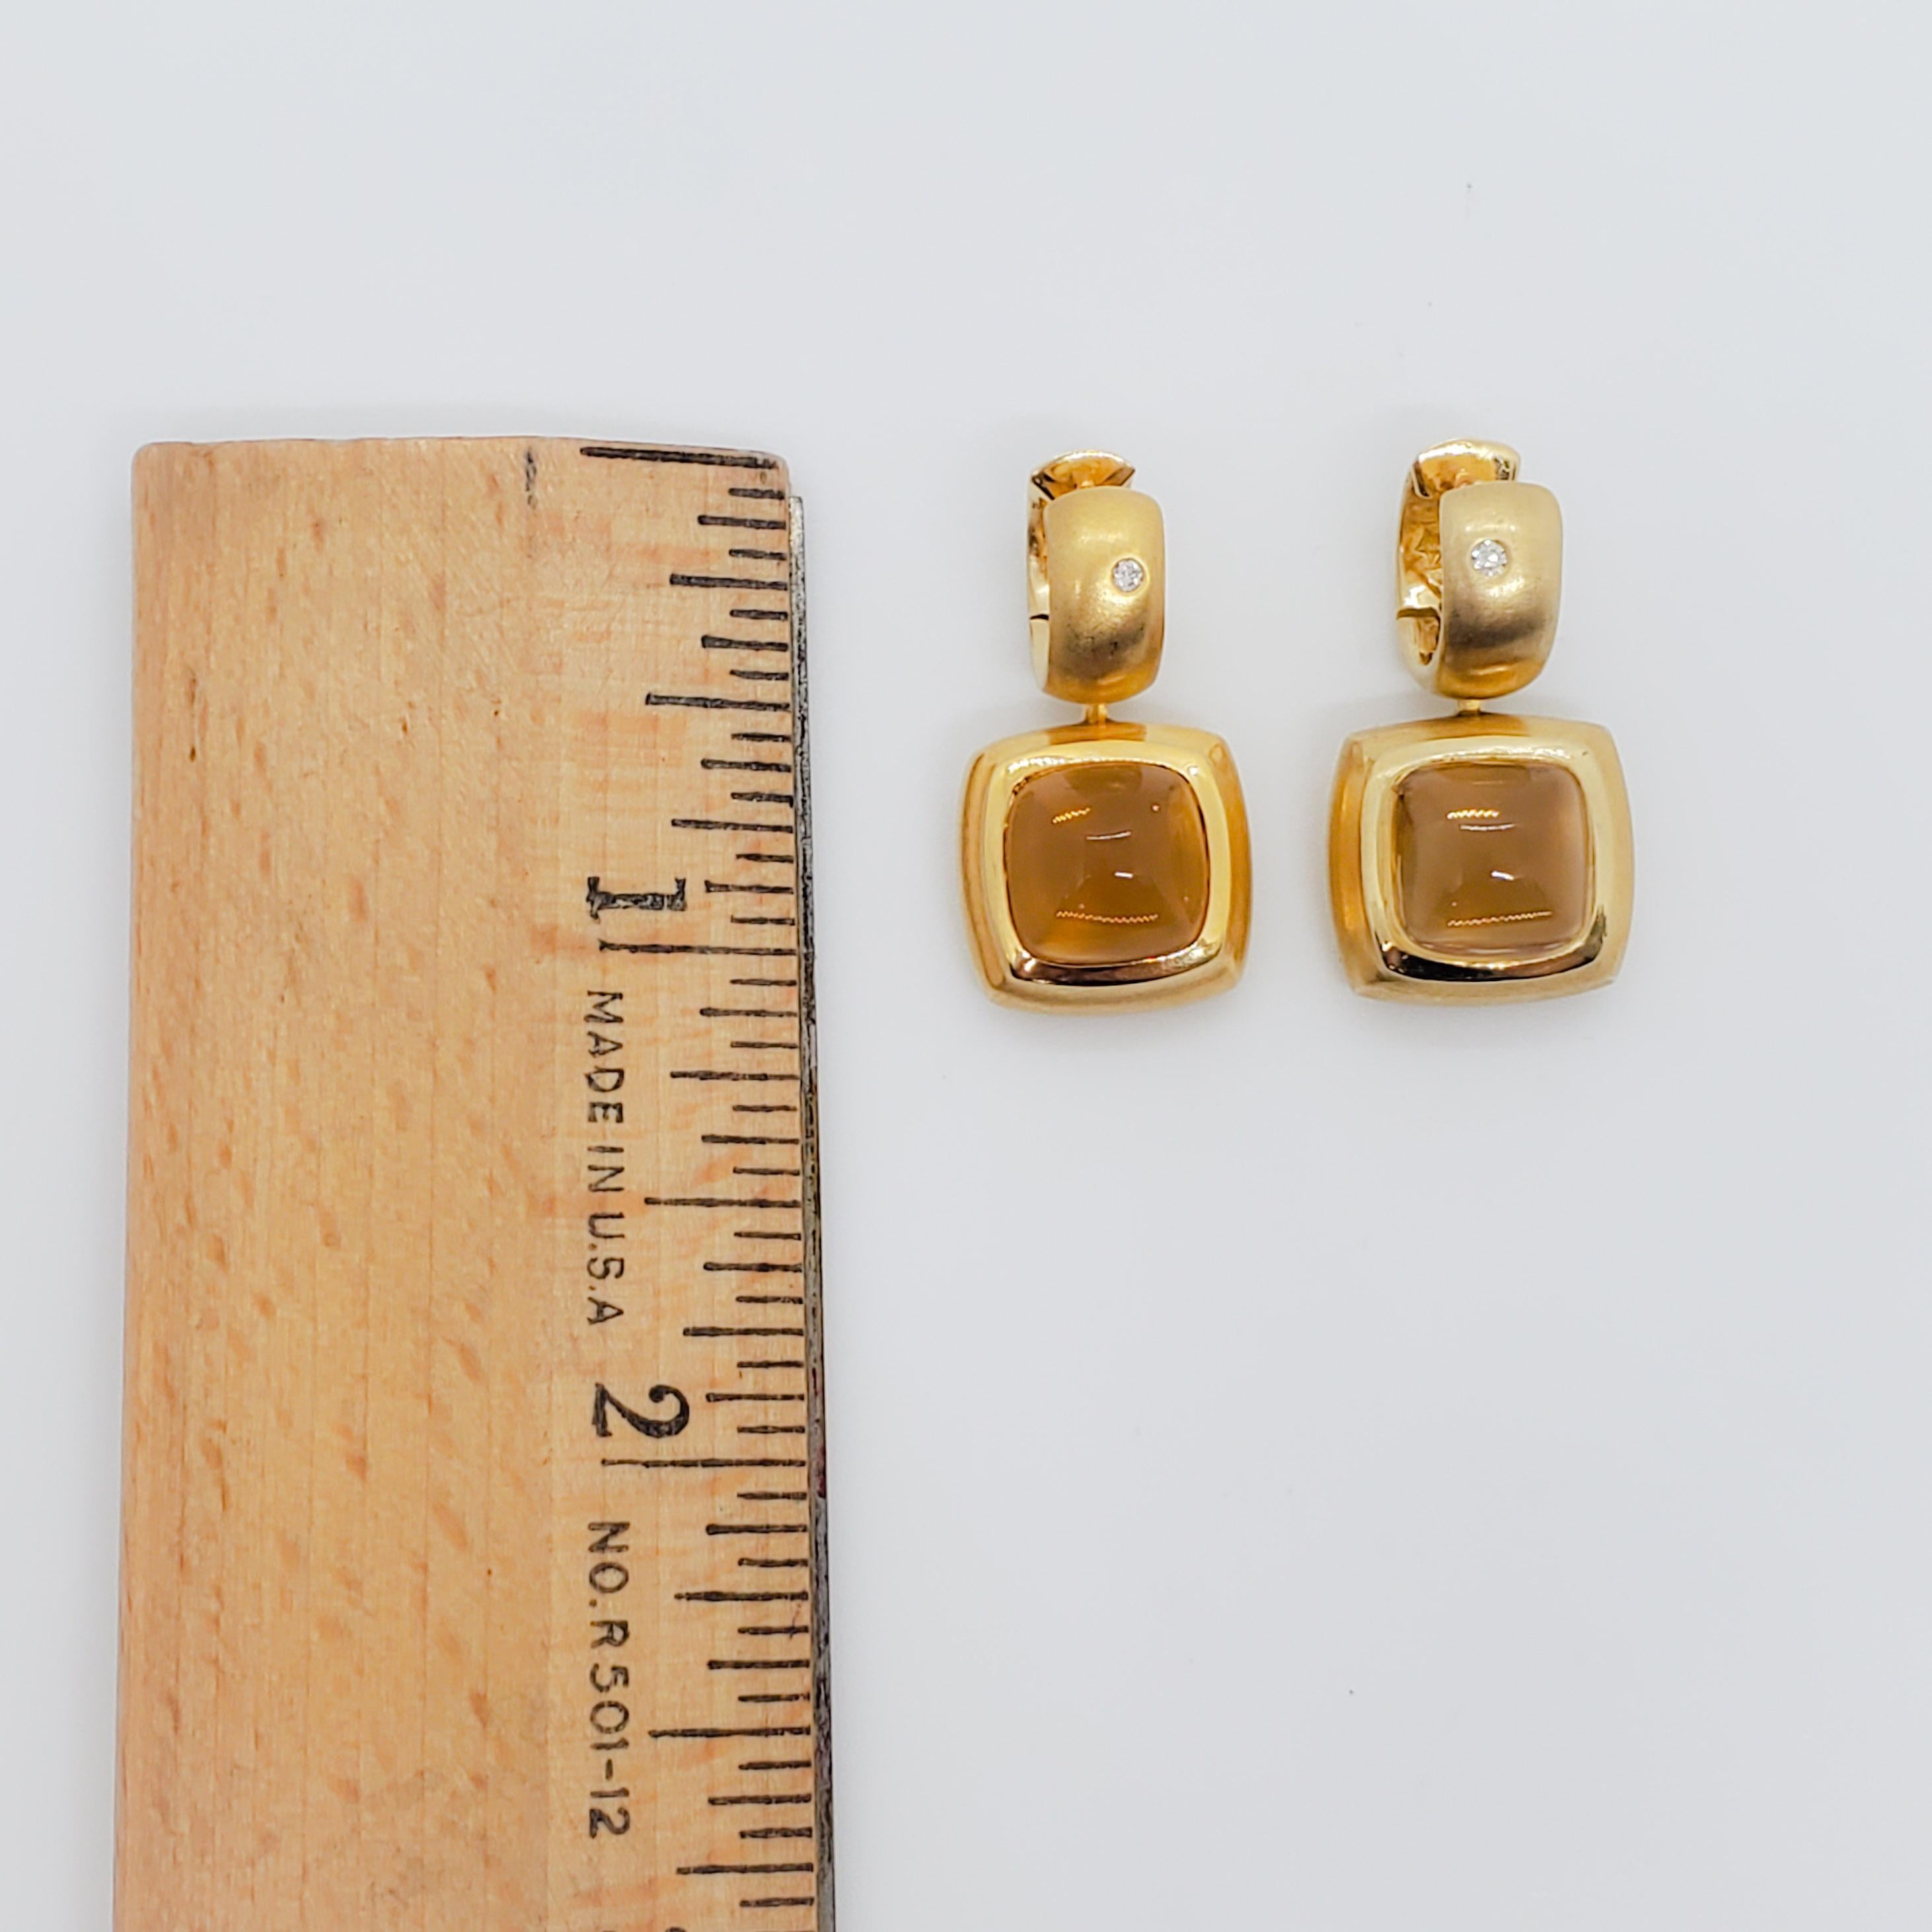 Gorgeous 6.00 ct. citrine cabochon squares with 0.02 ct. white diamond rounds.  Handmade 18k yellow gold mountings.